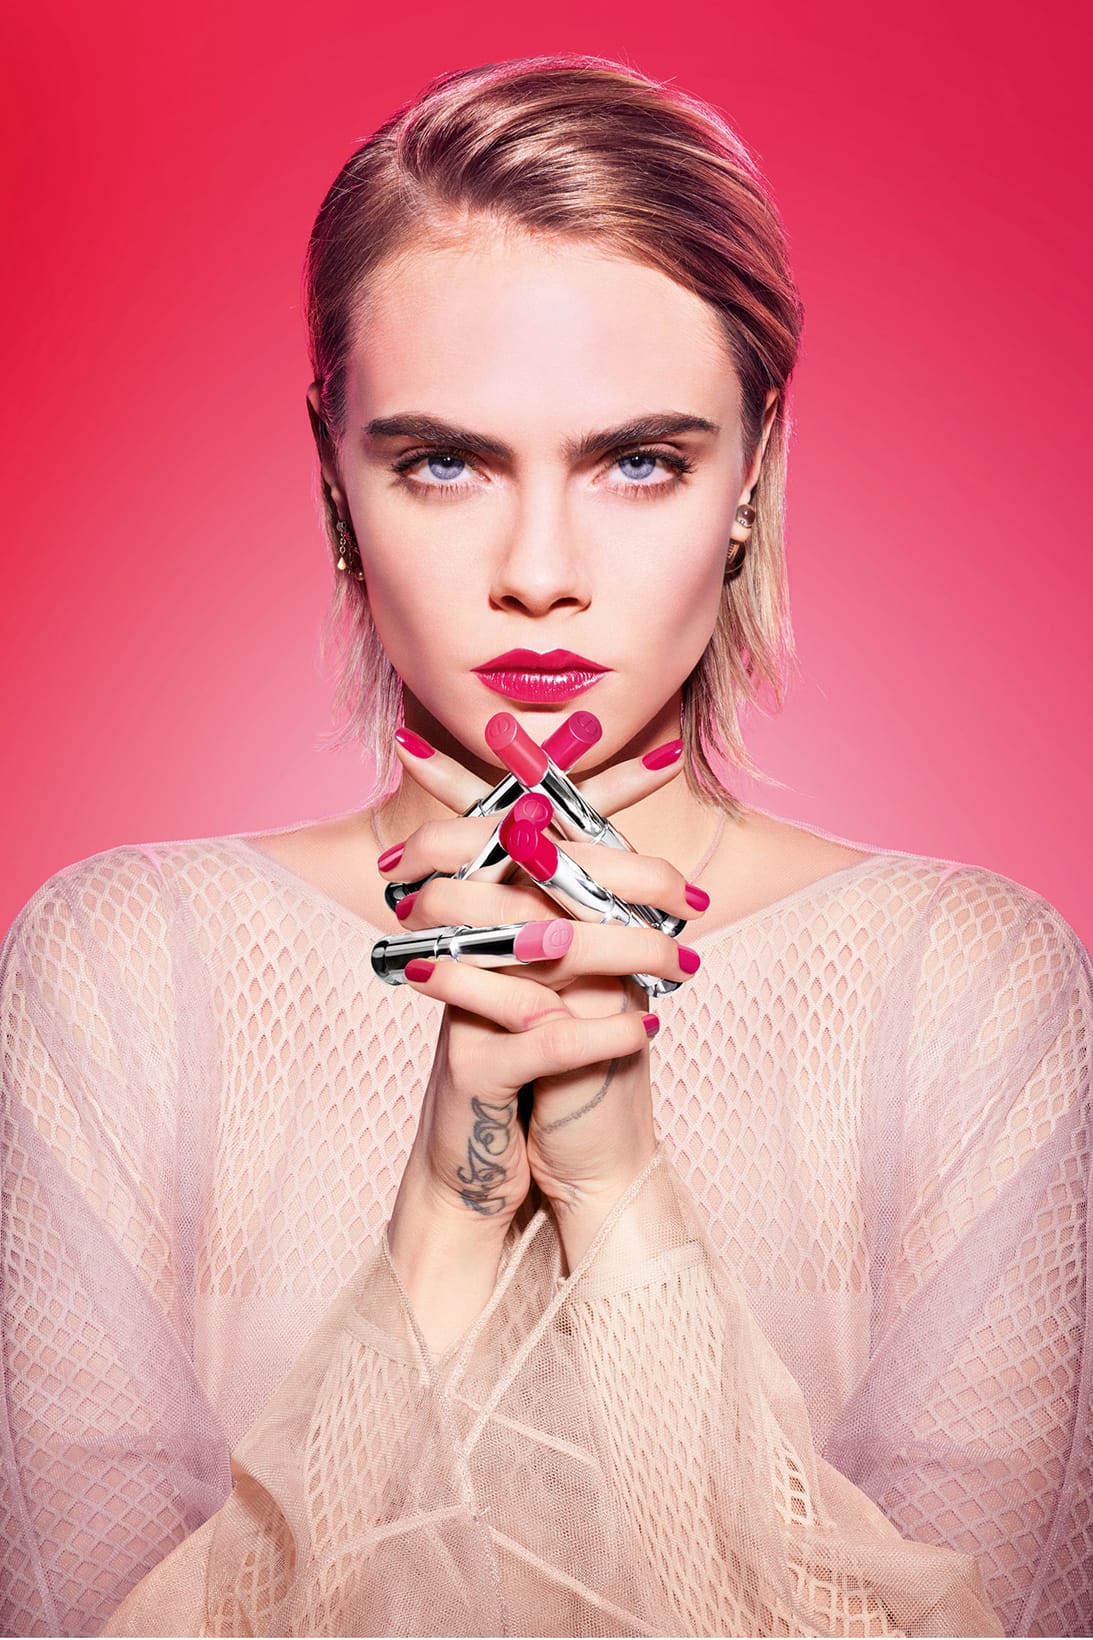 Dior  The nextgeneration Lip Glow has arrived Just like Cara Delevingne  enhance your natural lips with the subtle shine from the new 97 natural  origin Dior Lip Glow with cherry oil